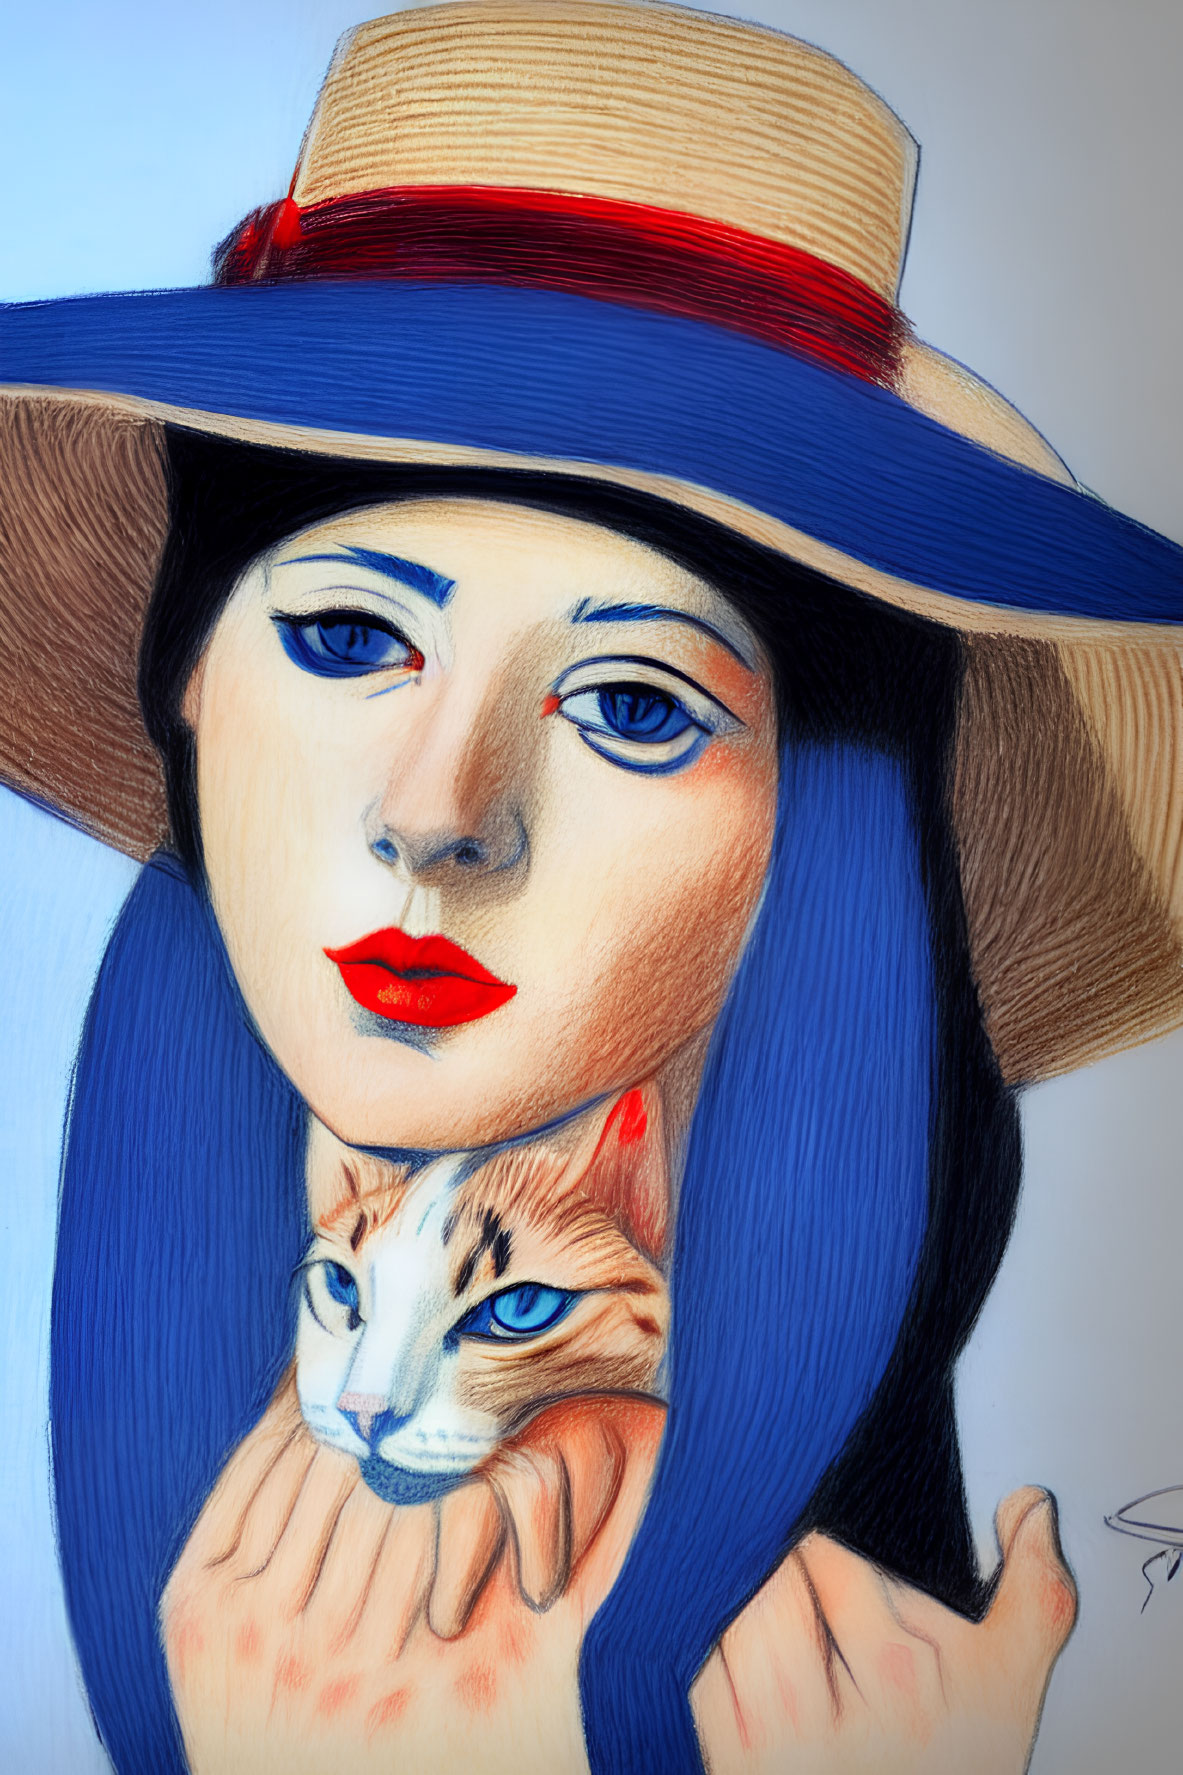 Stylized portrait of a woman with red lips and blue eyeshadow, wearing a large hat